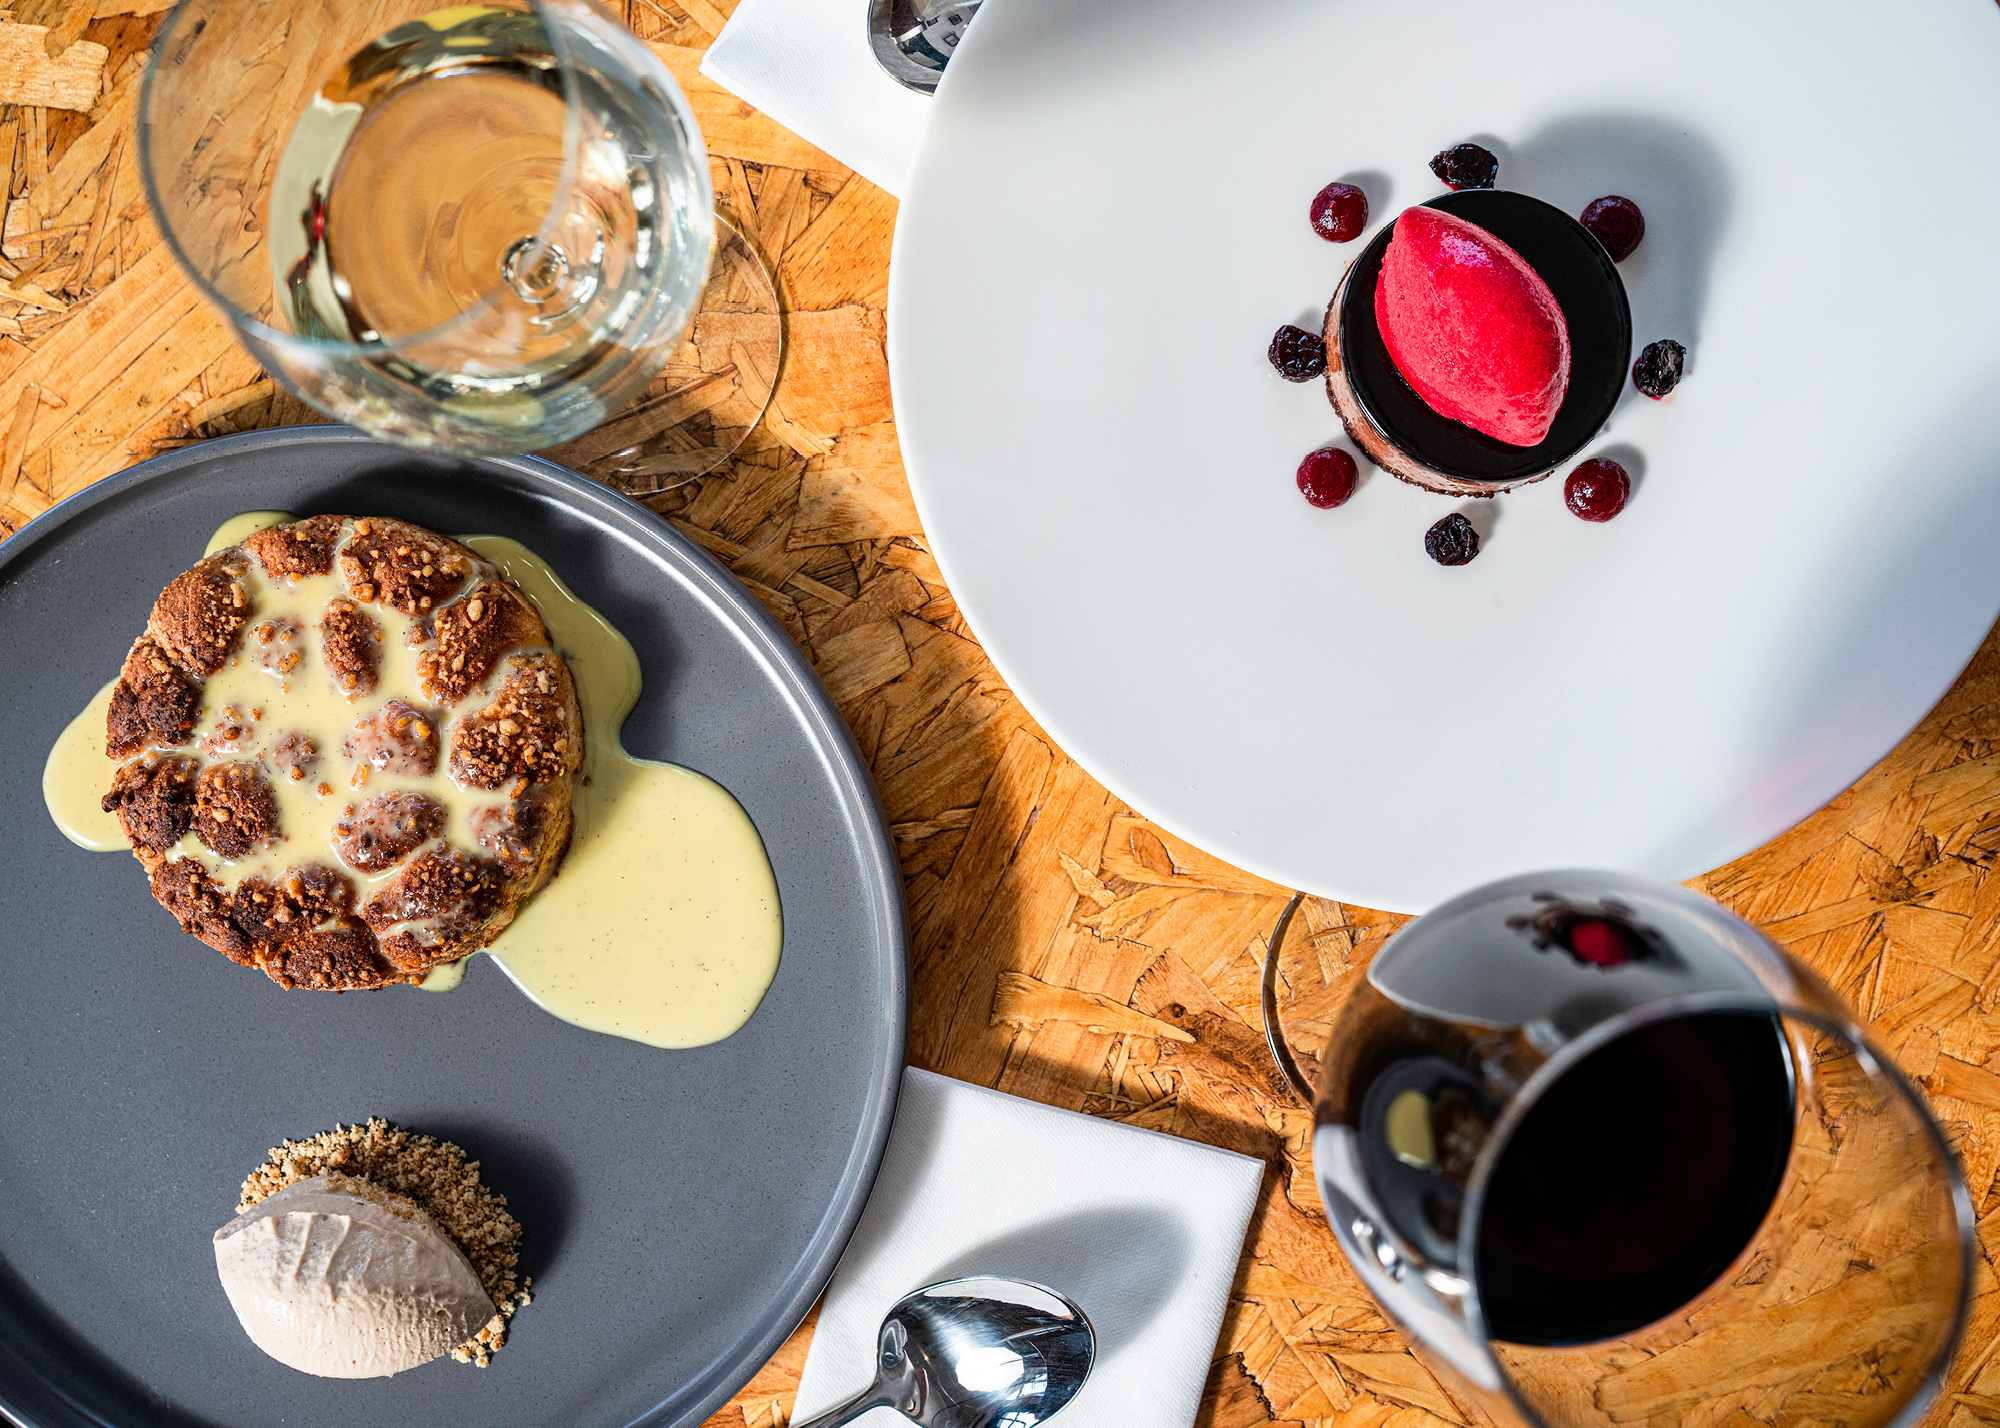 Desserts at Turul Project include the delicious walnut dumpling and “Ludláb” chocolate torte